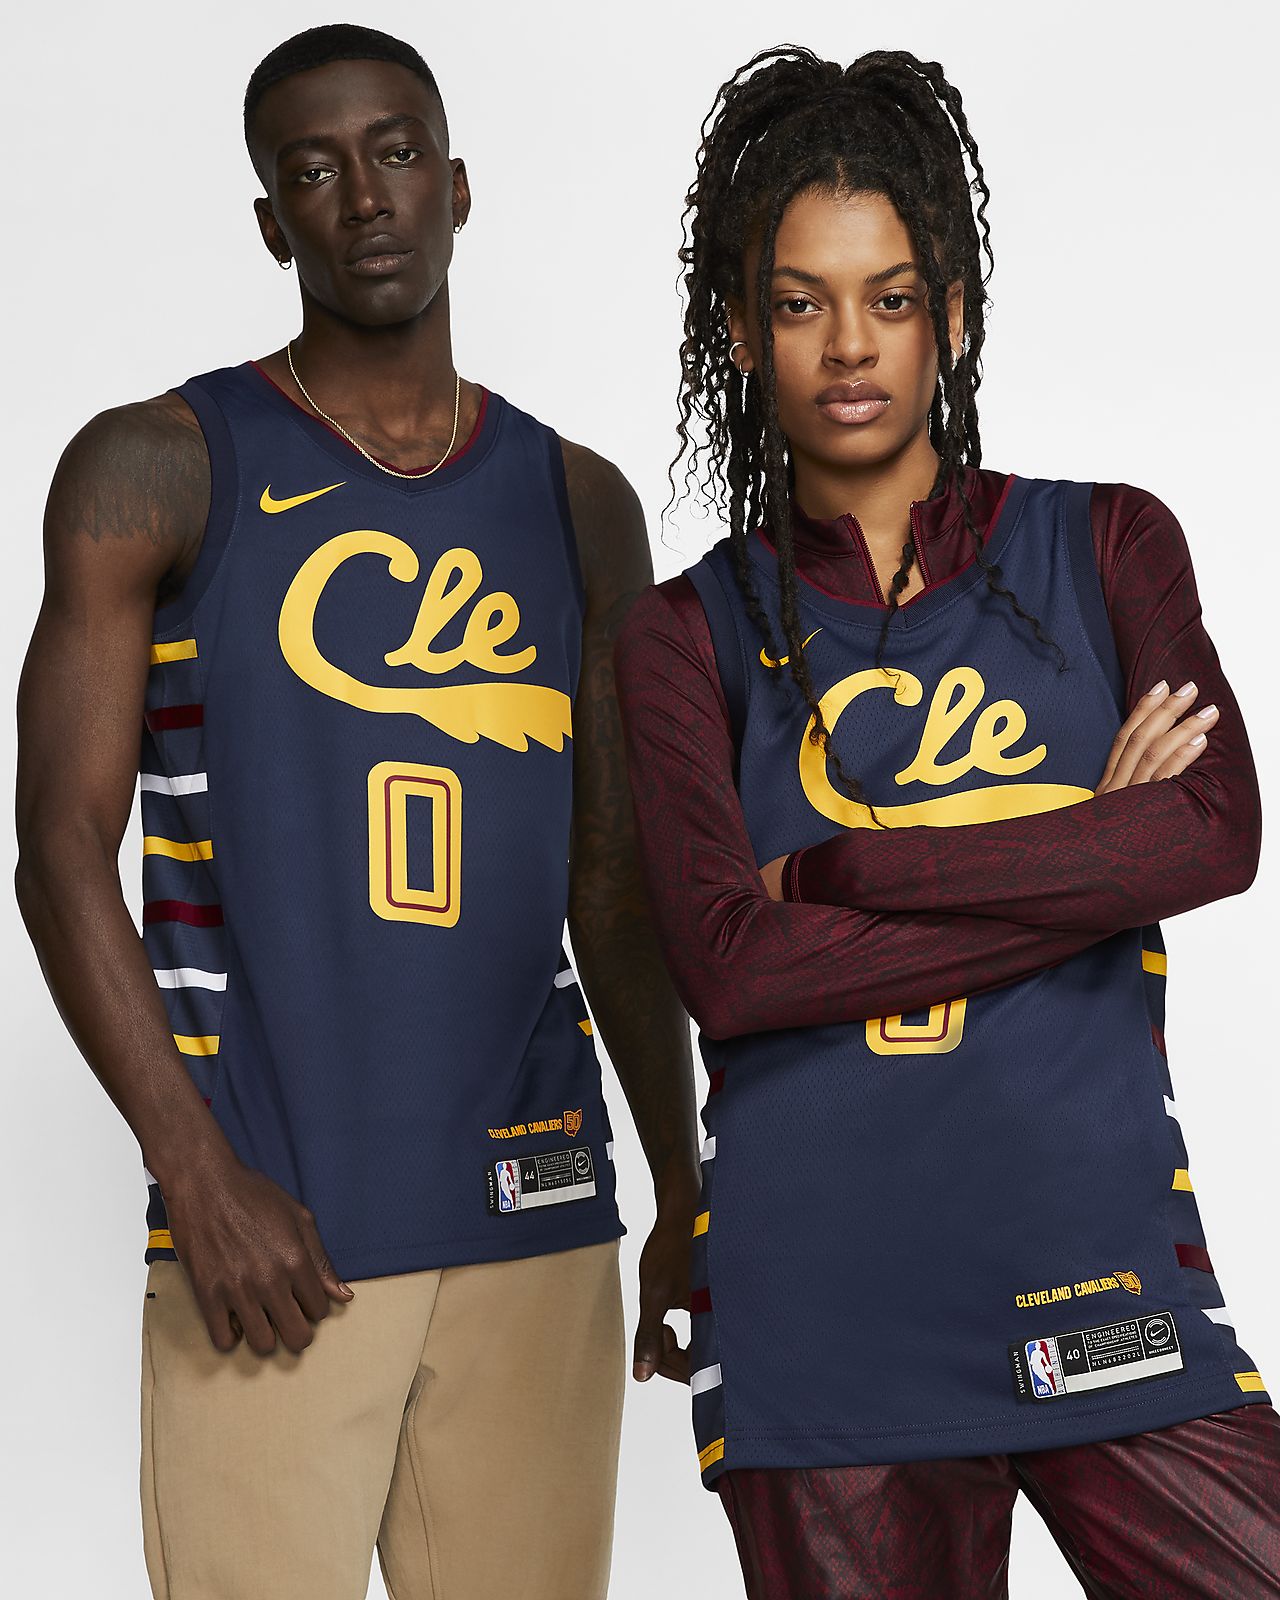 kevin love jersey womens